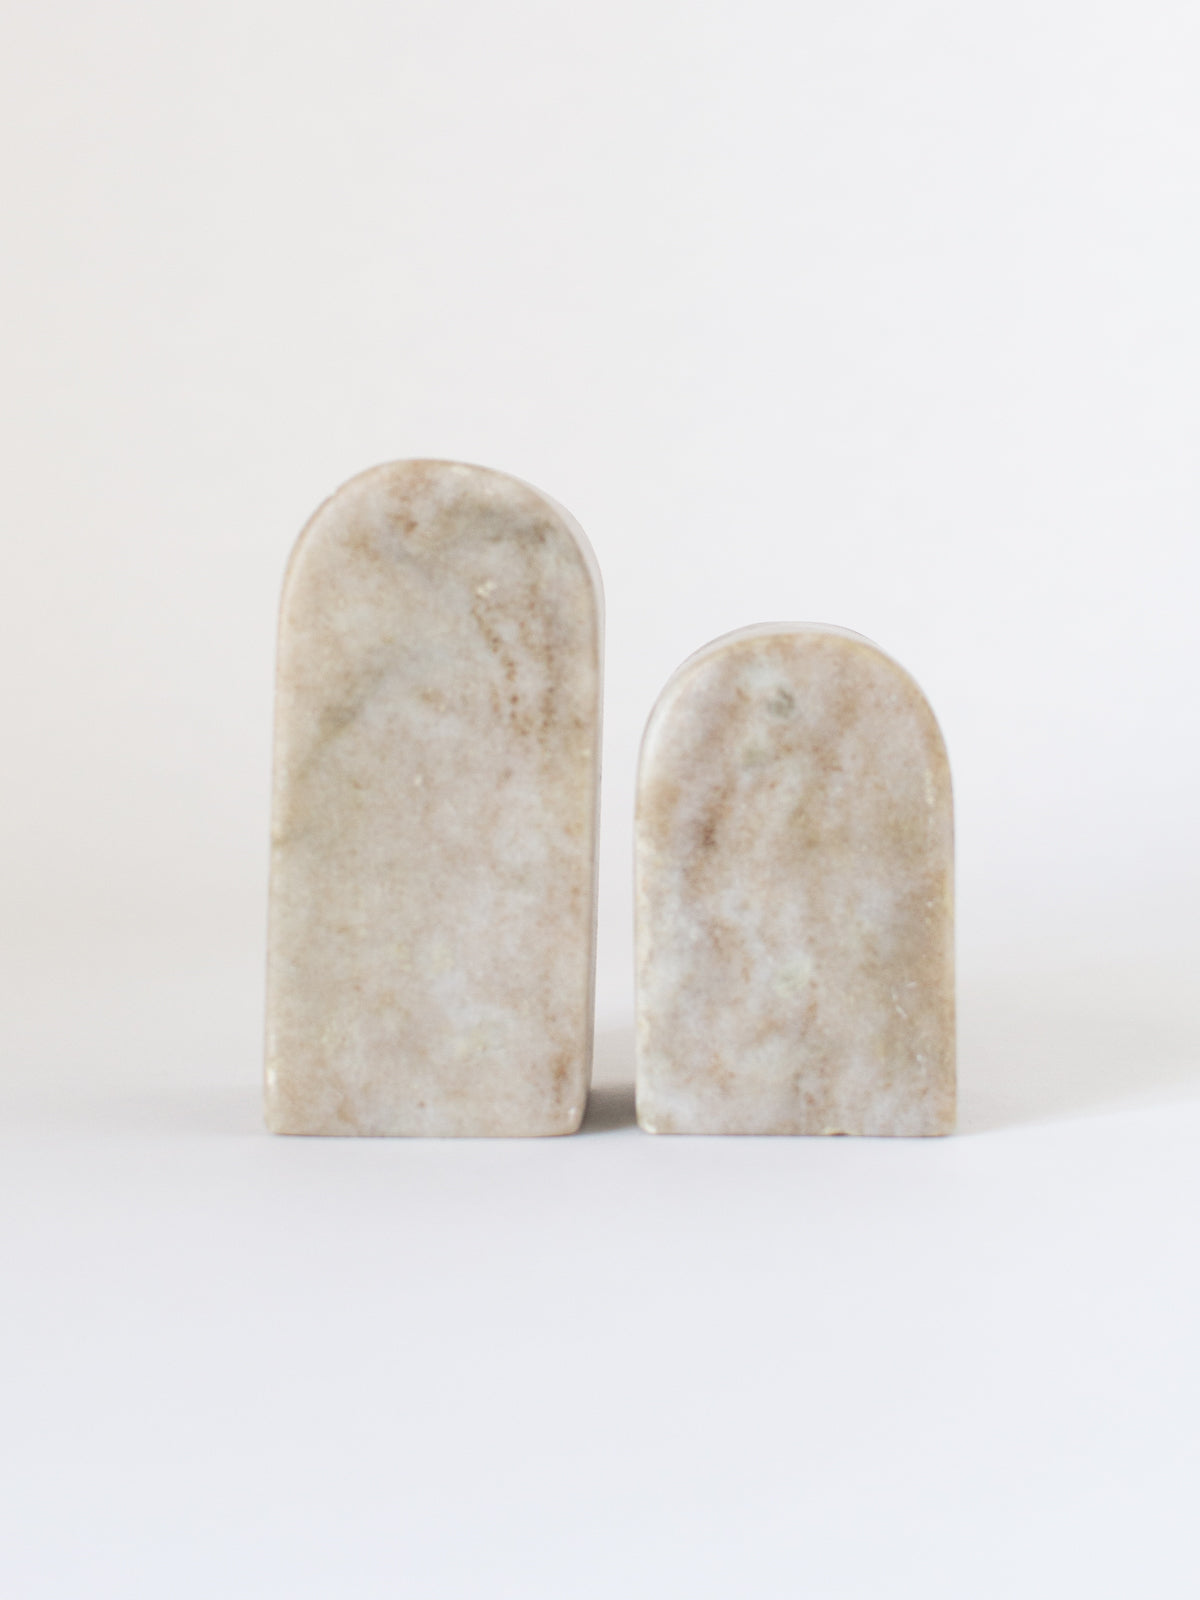 Marble Arch Bookend Set